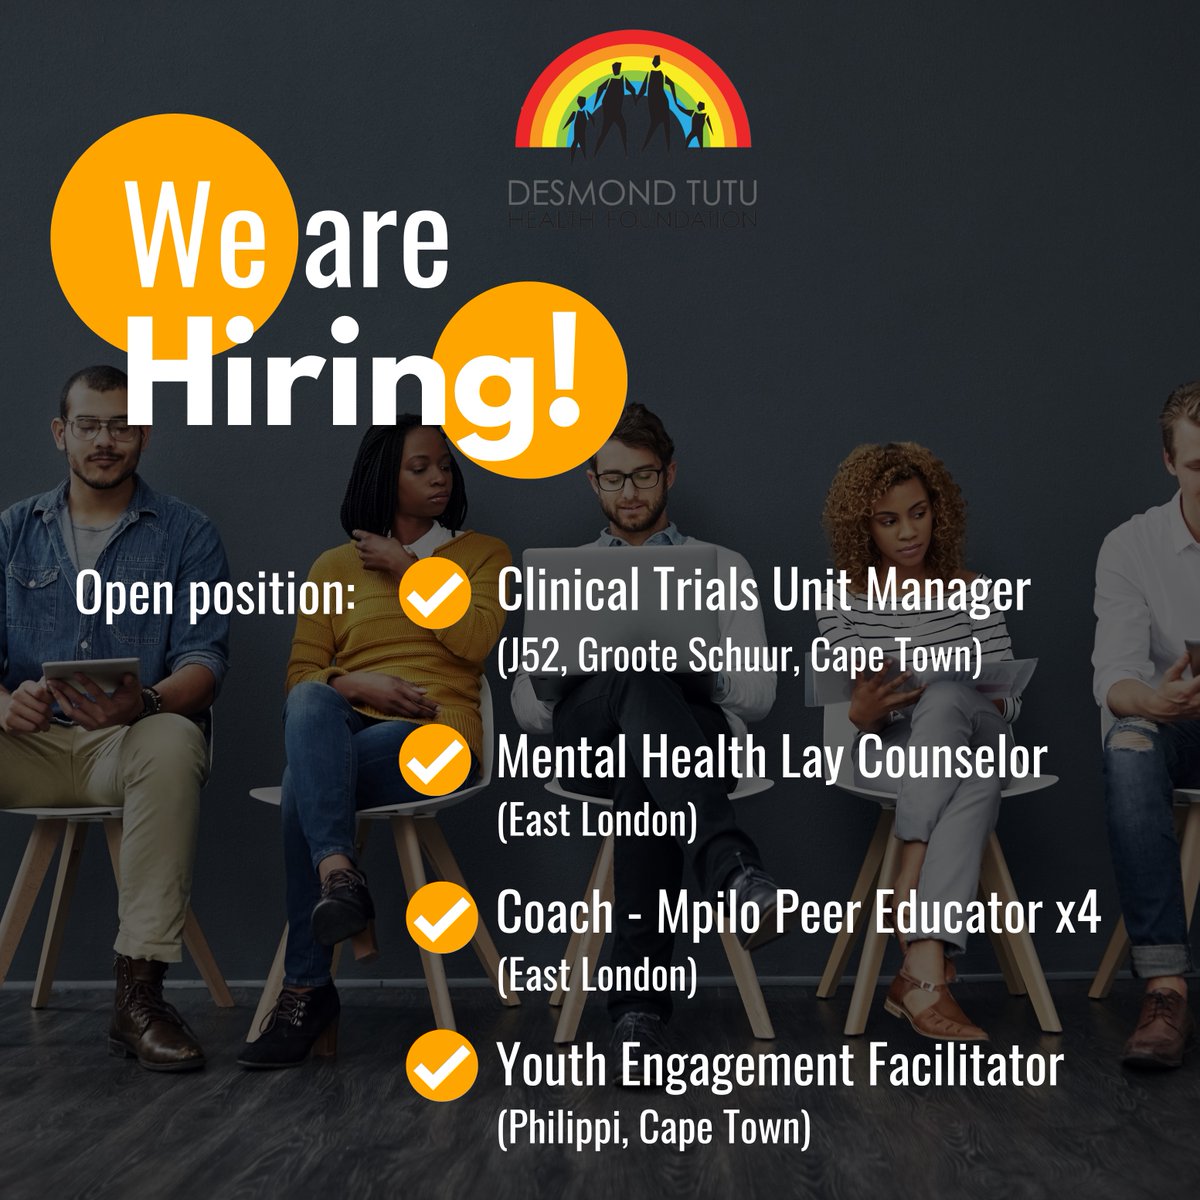 Are you passionate about making a difference in healthcare and research? We have exciting open positions available and we want YOU to be a part of our impactful work. To apply and explore the available opportunities, simply visit our careers page: applybe.com/hiv-research/s…